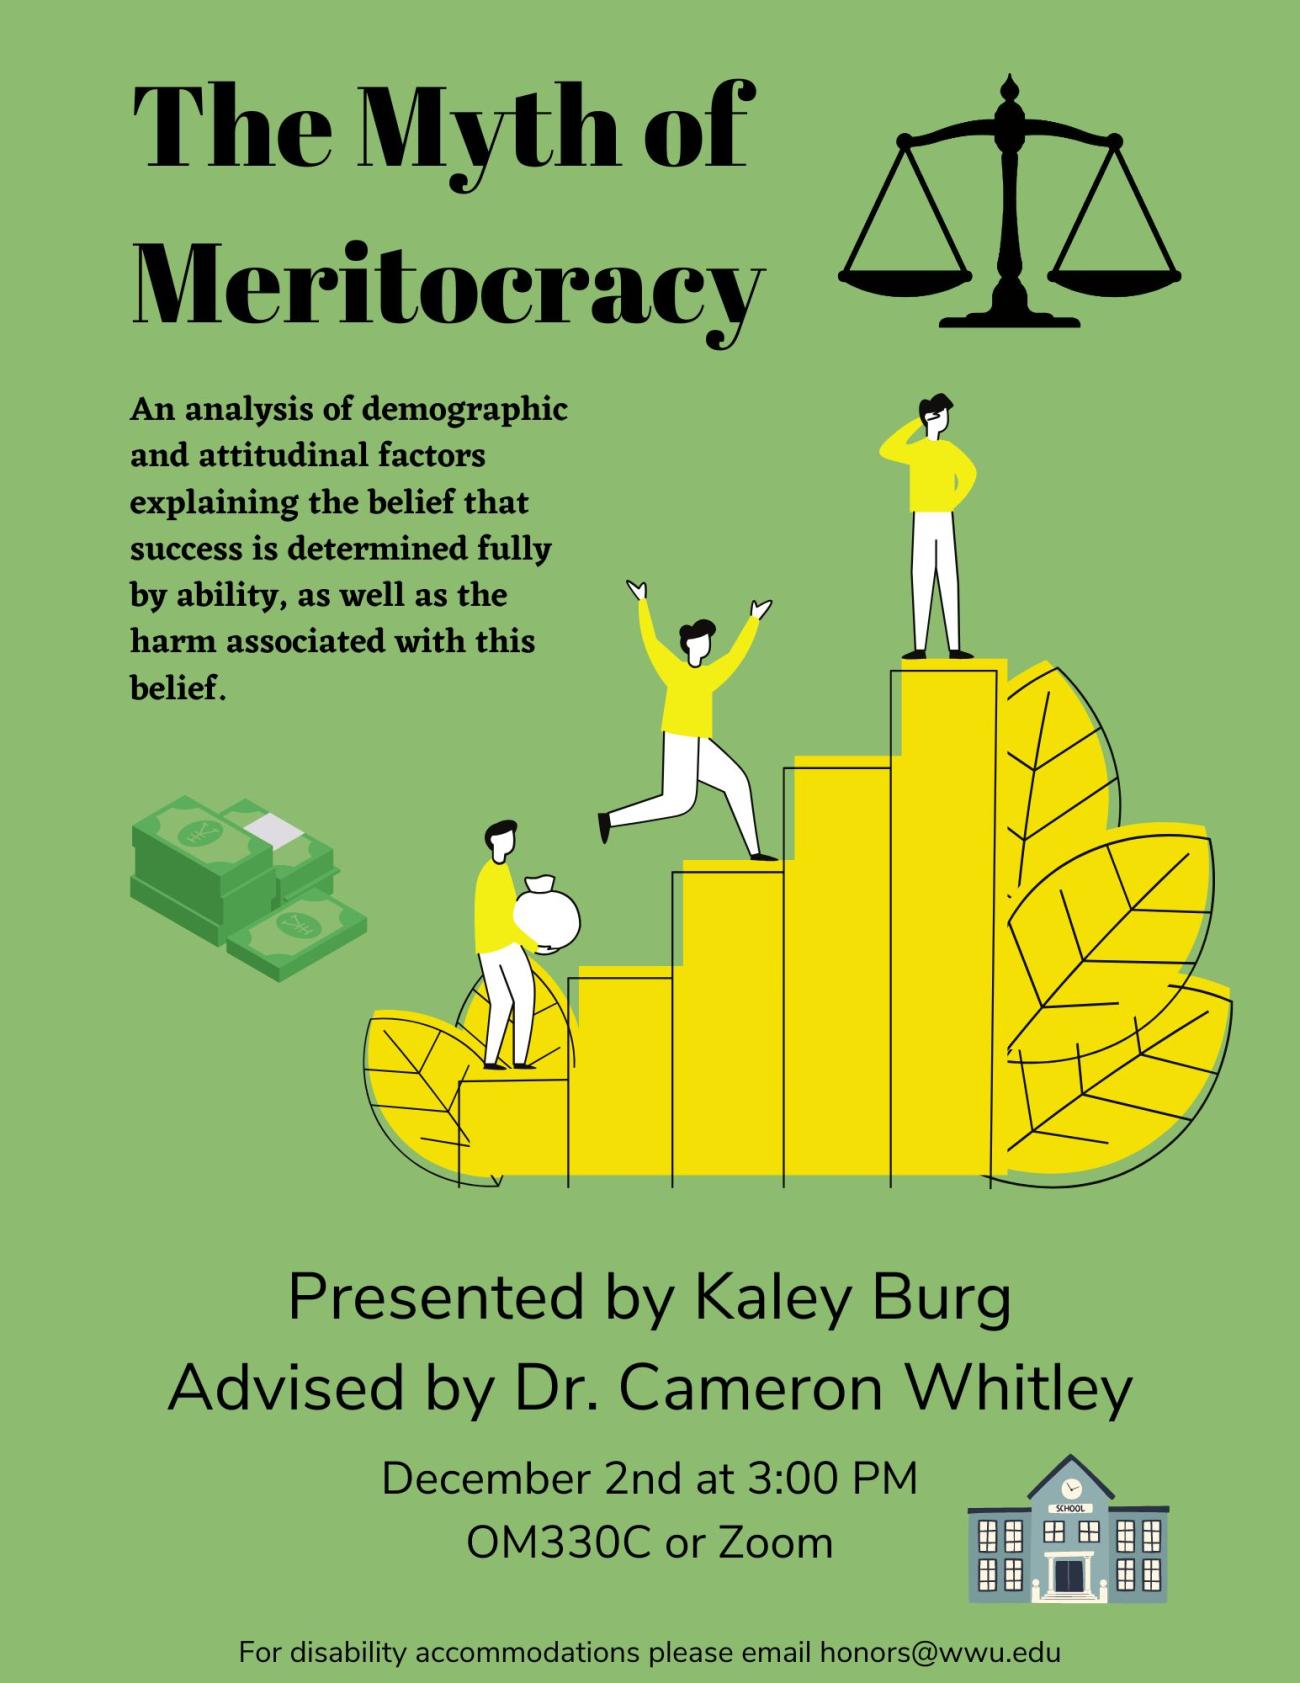 A green poster with a graphic of scales, money, people on a bar graph, and a school. The text reads: "The Myth of Meritocracy, an analysis of demographic and attitudinal factors explaining the belief that success is determined fully by ability, as well as the harm associated with this belief. Presented by Kaley Burg. Advised by Dr. Cameron Whitley. December 2nd at 3:00 PM. OM330C or on Zoom. For disability accommodations, please email honors@wwu.edu."